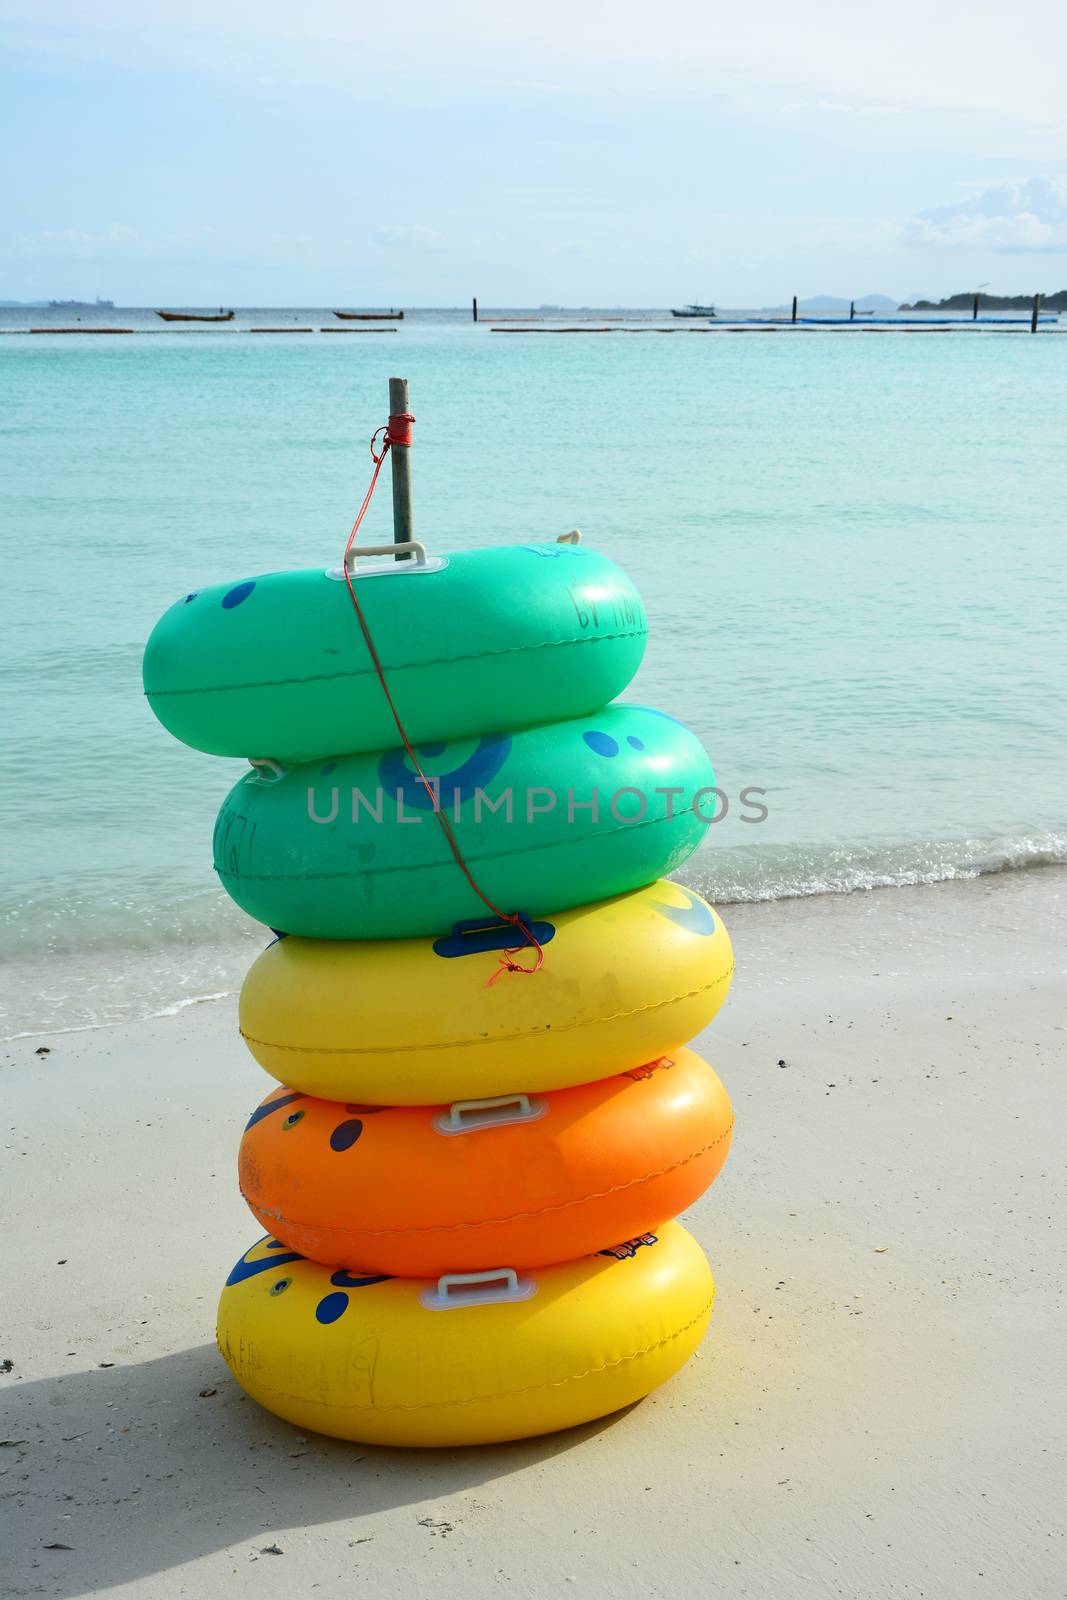 Colored ring on the beach at coral island or Koh Larn ,Pattaya Thailand